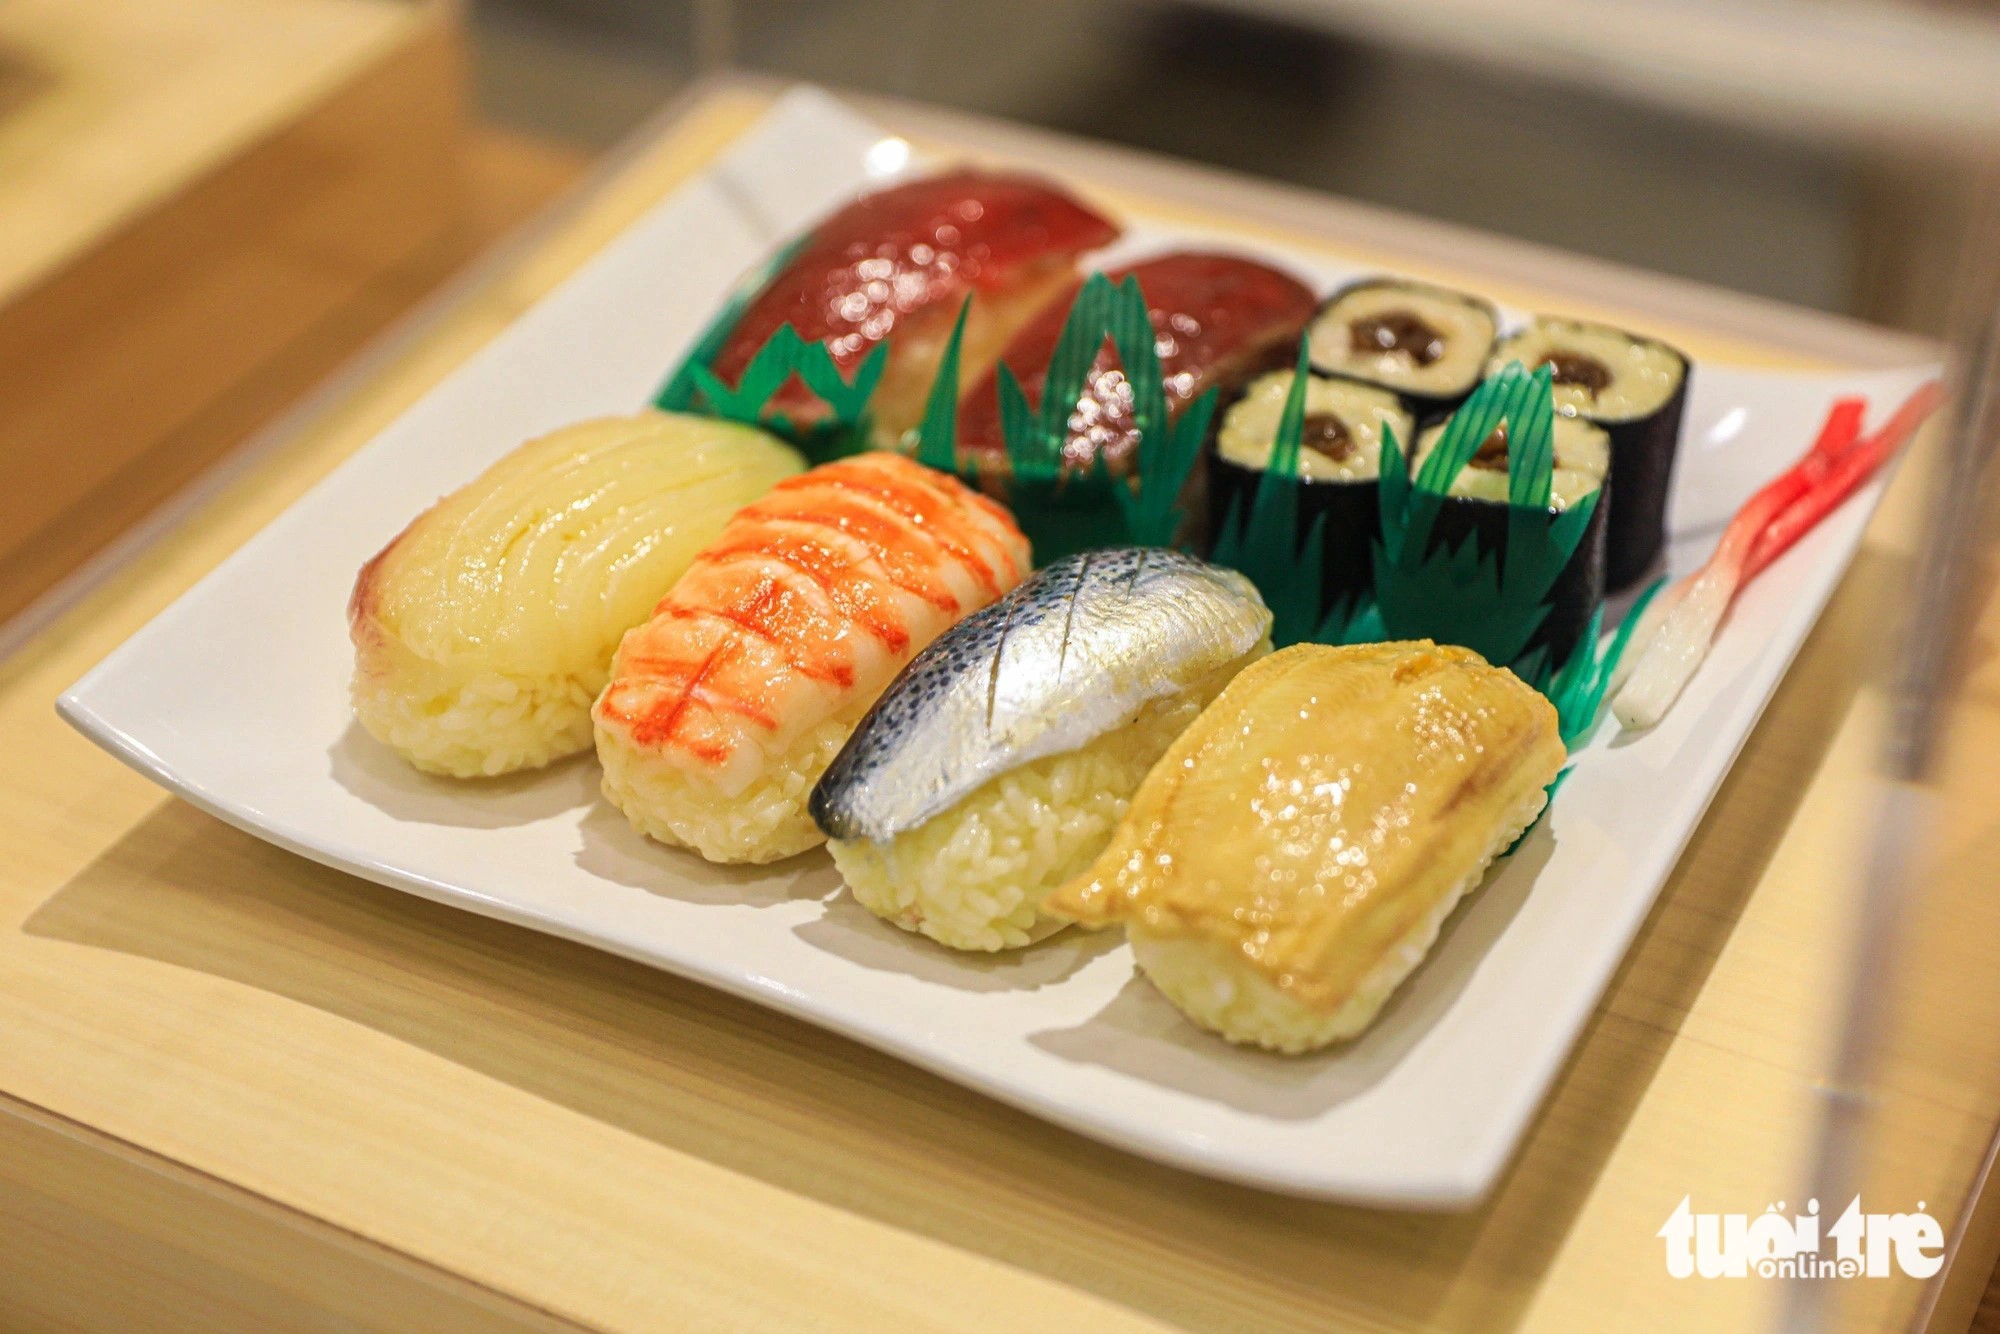 Bo-zushi features sugata-zushi fish fillets without the head and tail, pressed with white rice bars, a favored dish for festivals and commemorative events. Photo: Danh Khang / Tuoi Tre